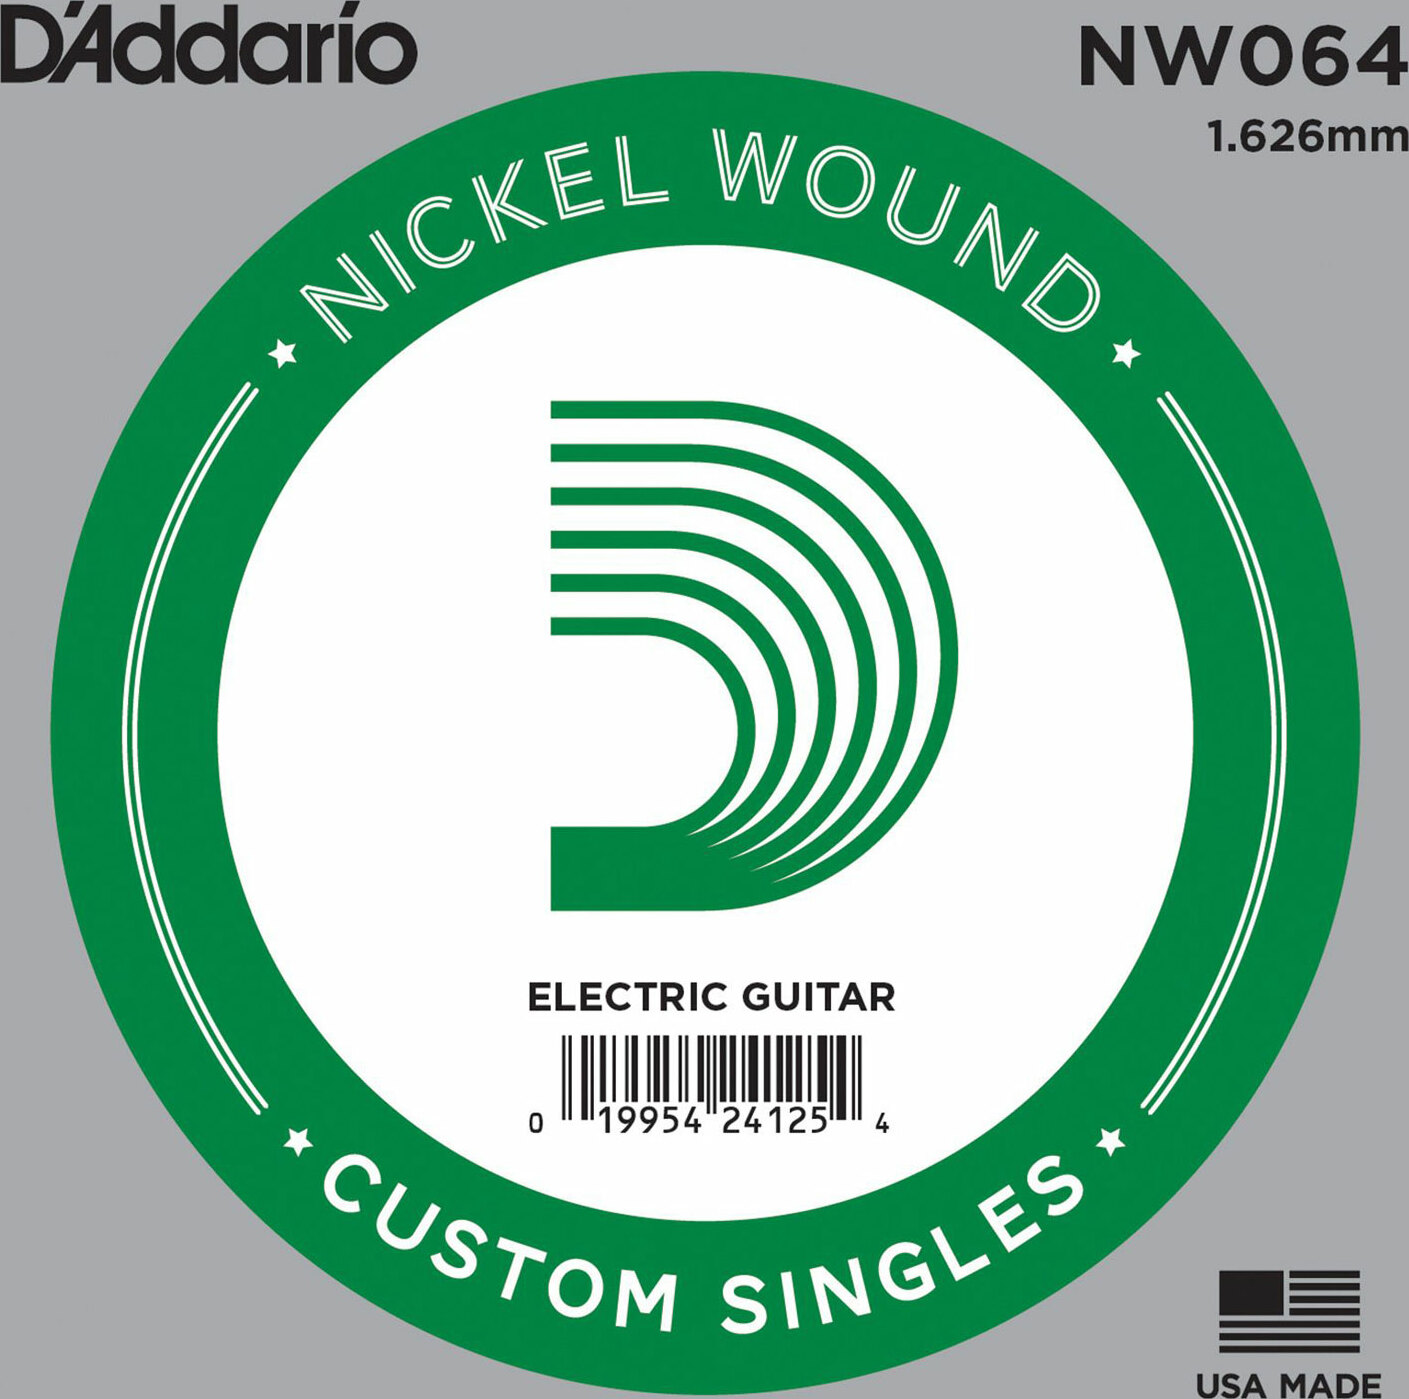 D'addario Corde Au DÉtail Electric (1) Nw064  Single Xl Nickel Wound 064 - Acoustic guitar strings - Main picture